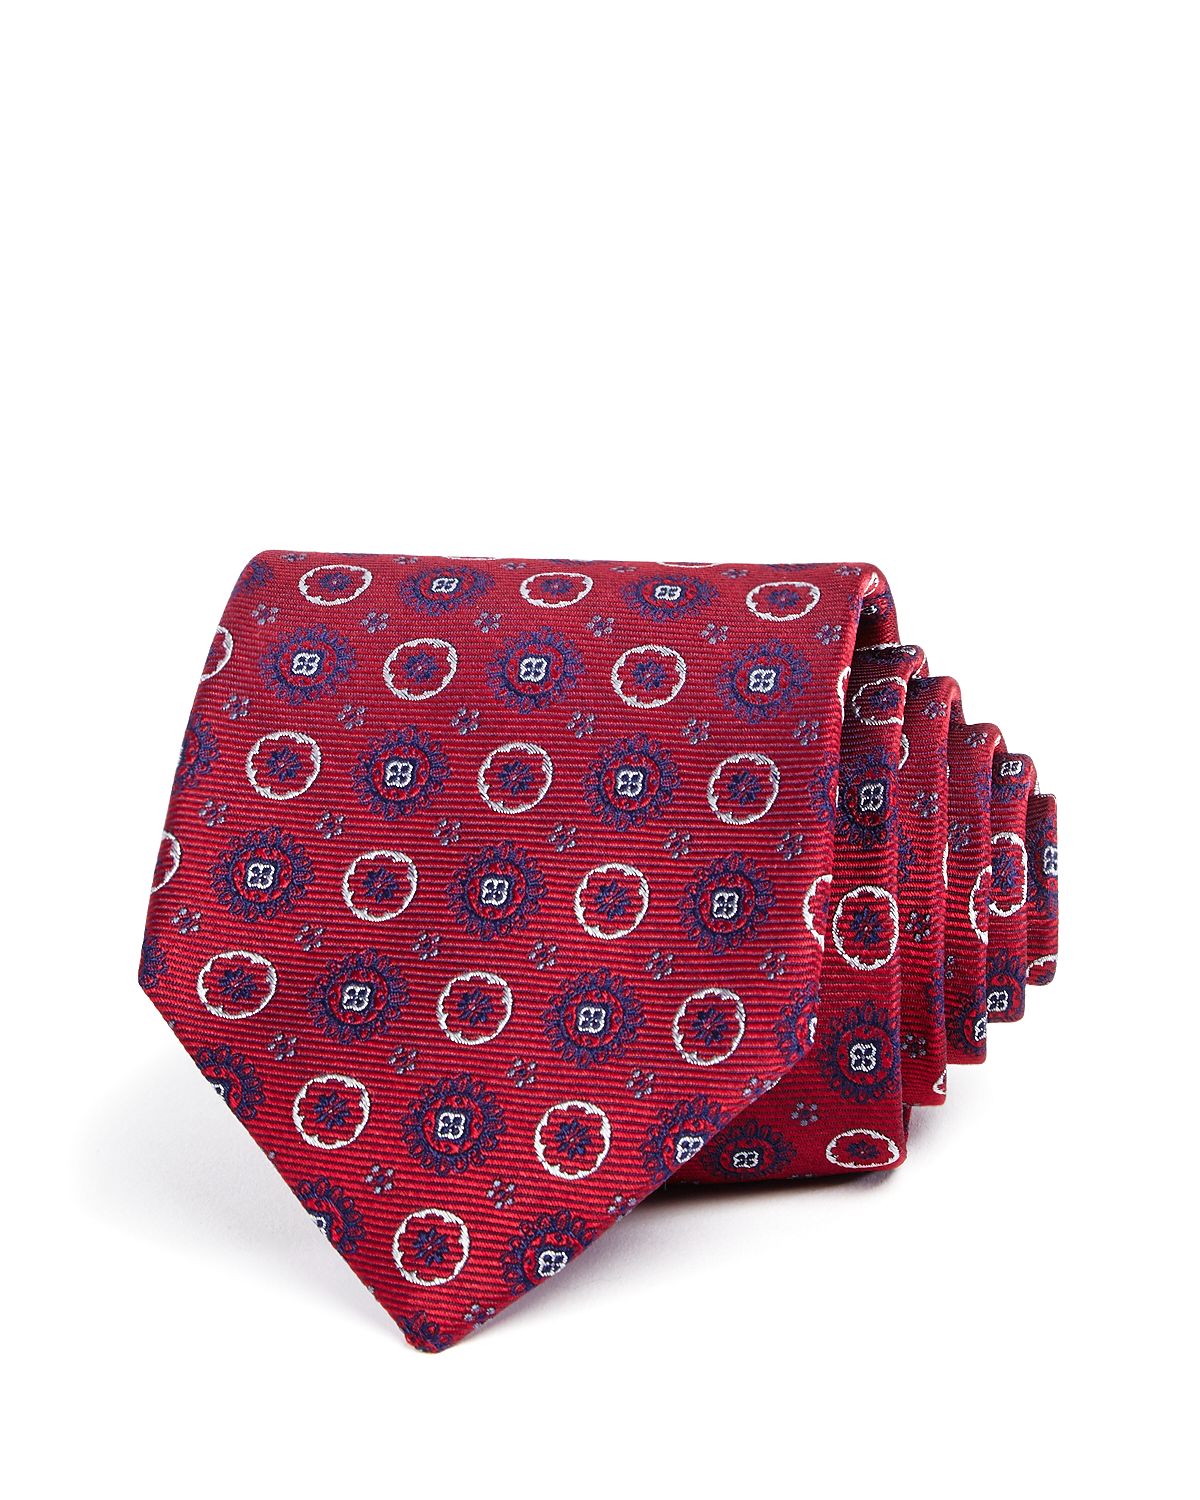 The Men's Store Floral Medallion Silk Classic Tie Red/Navy